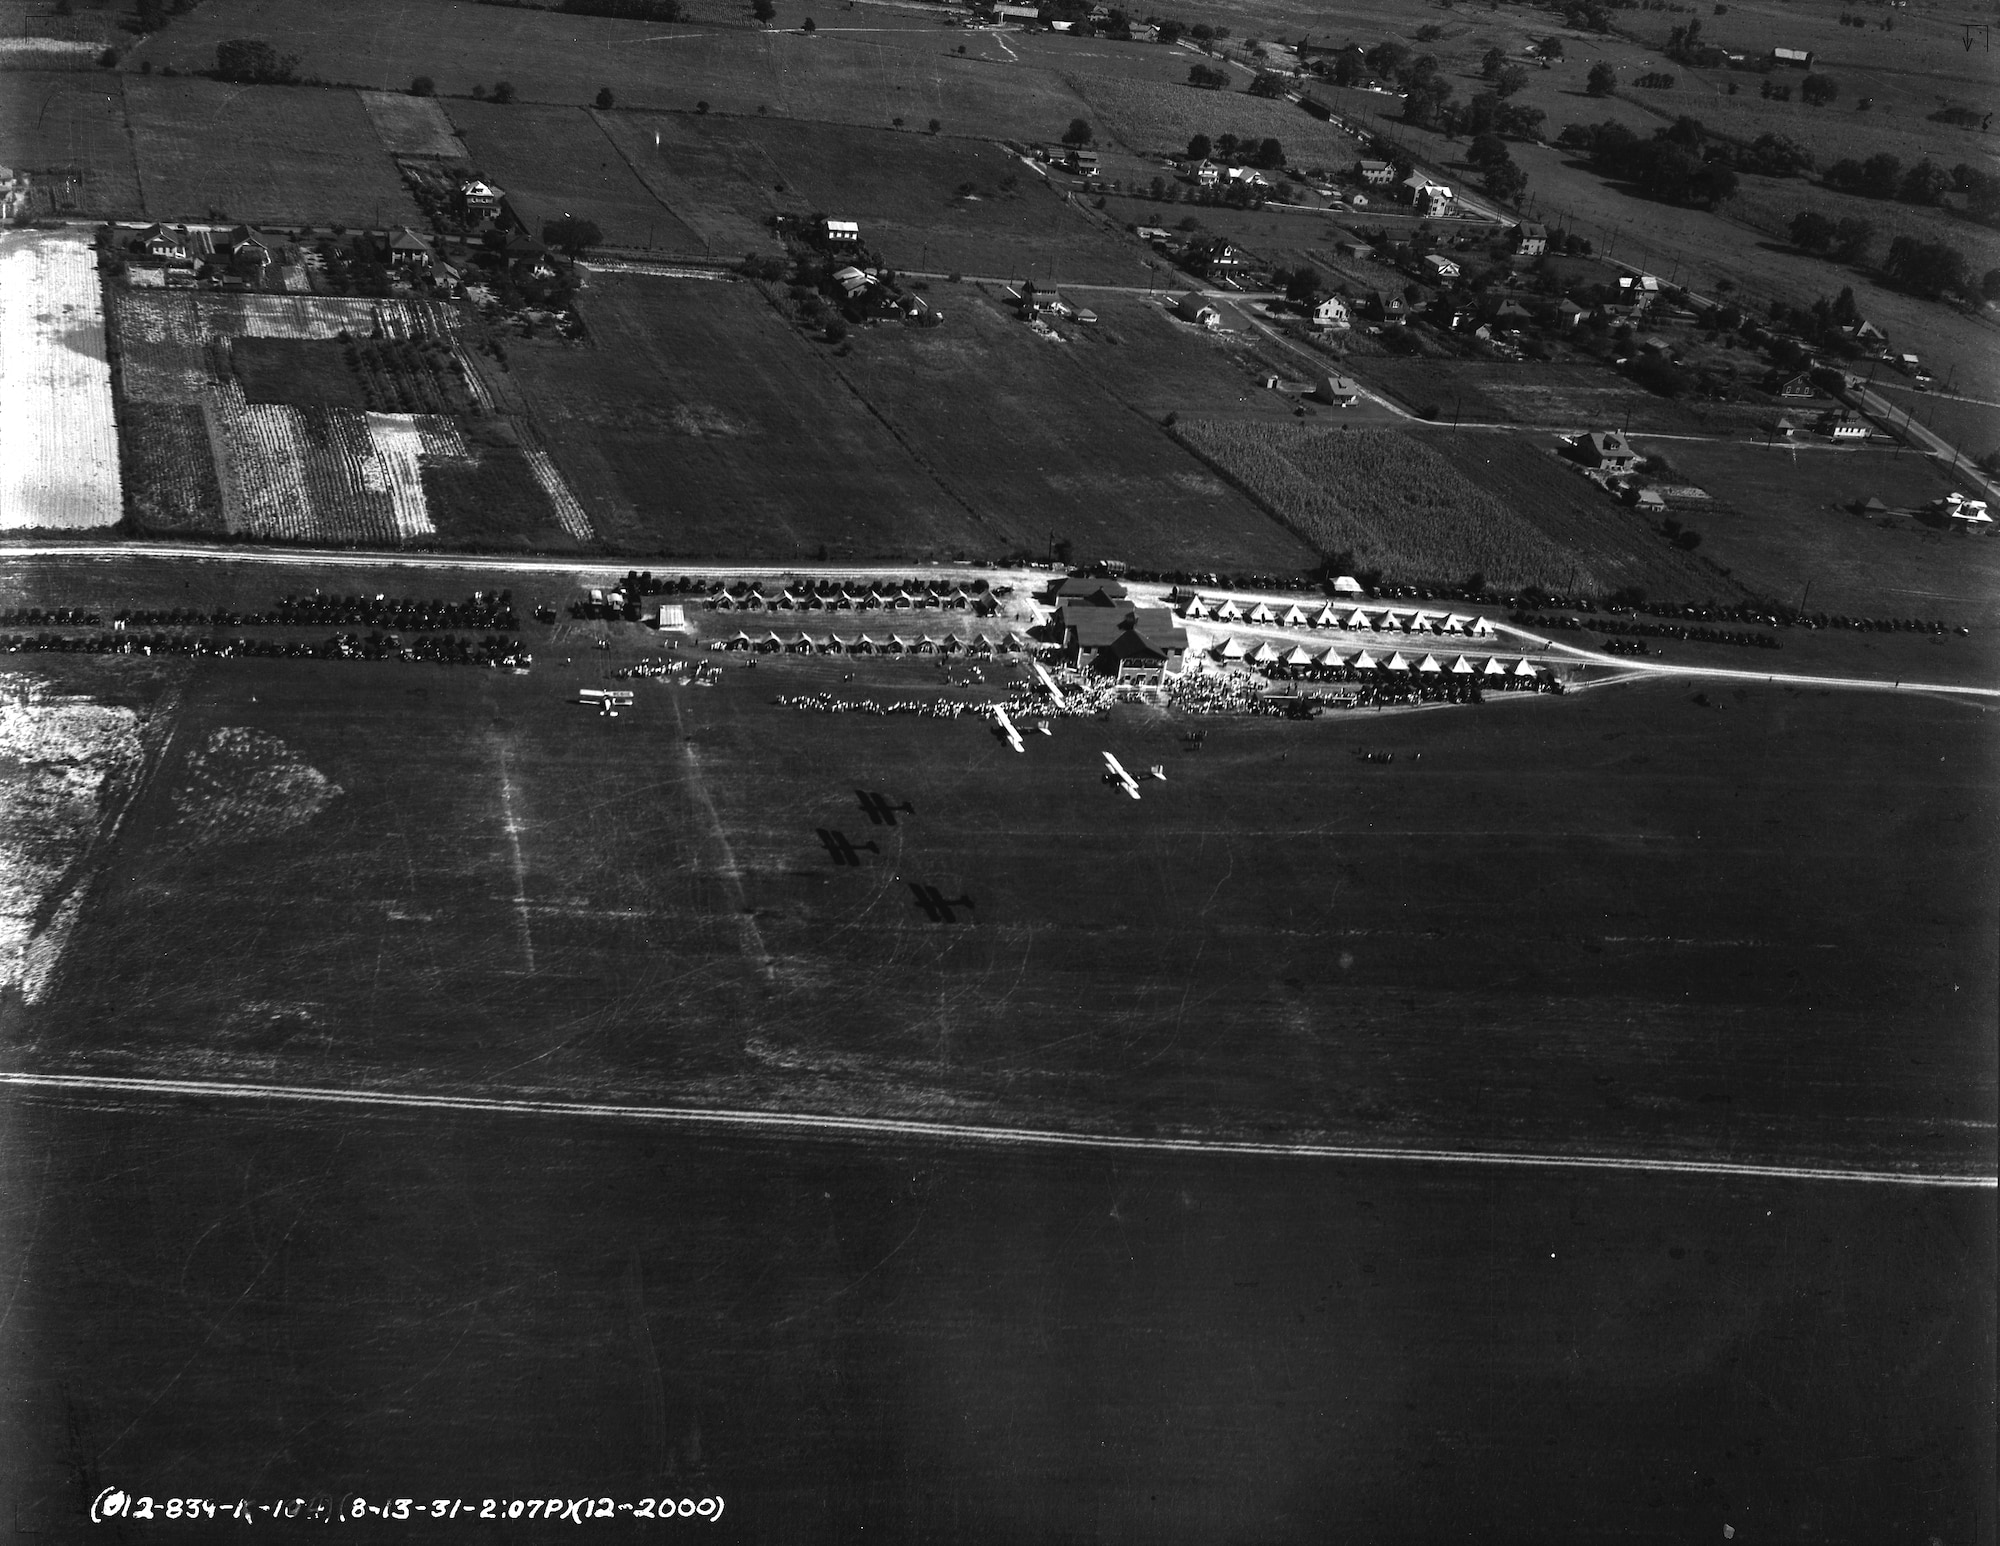 A formation of three O-38 aircraft belonging to the Maryland National Guard's 104th Observation Squadron fly over Detrick Field, in Frederick, Md., Aug. 13, 1931. Detrick Field, which later became Fort Detrick, Md., was named in honor of Dr. (Capt.) Fredrick Detrick, the squadron's flight surgeon, who died in June 1931. (Released)